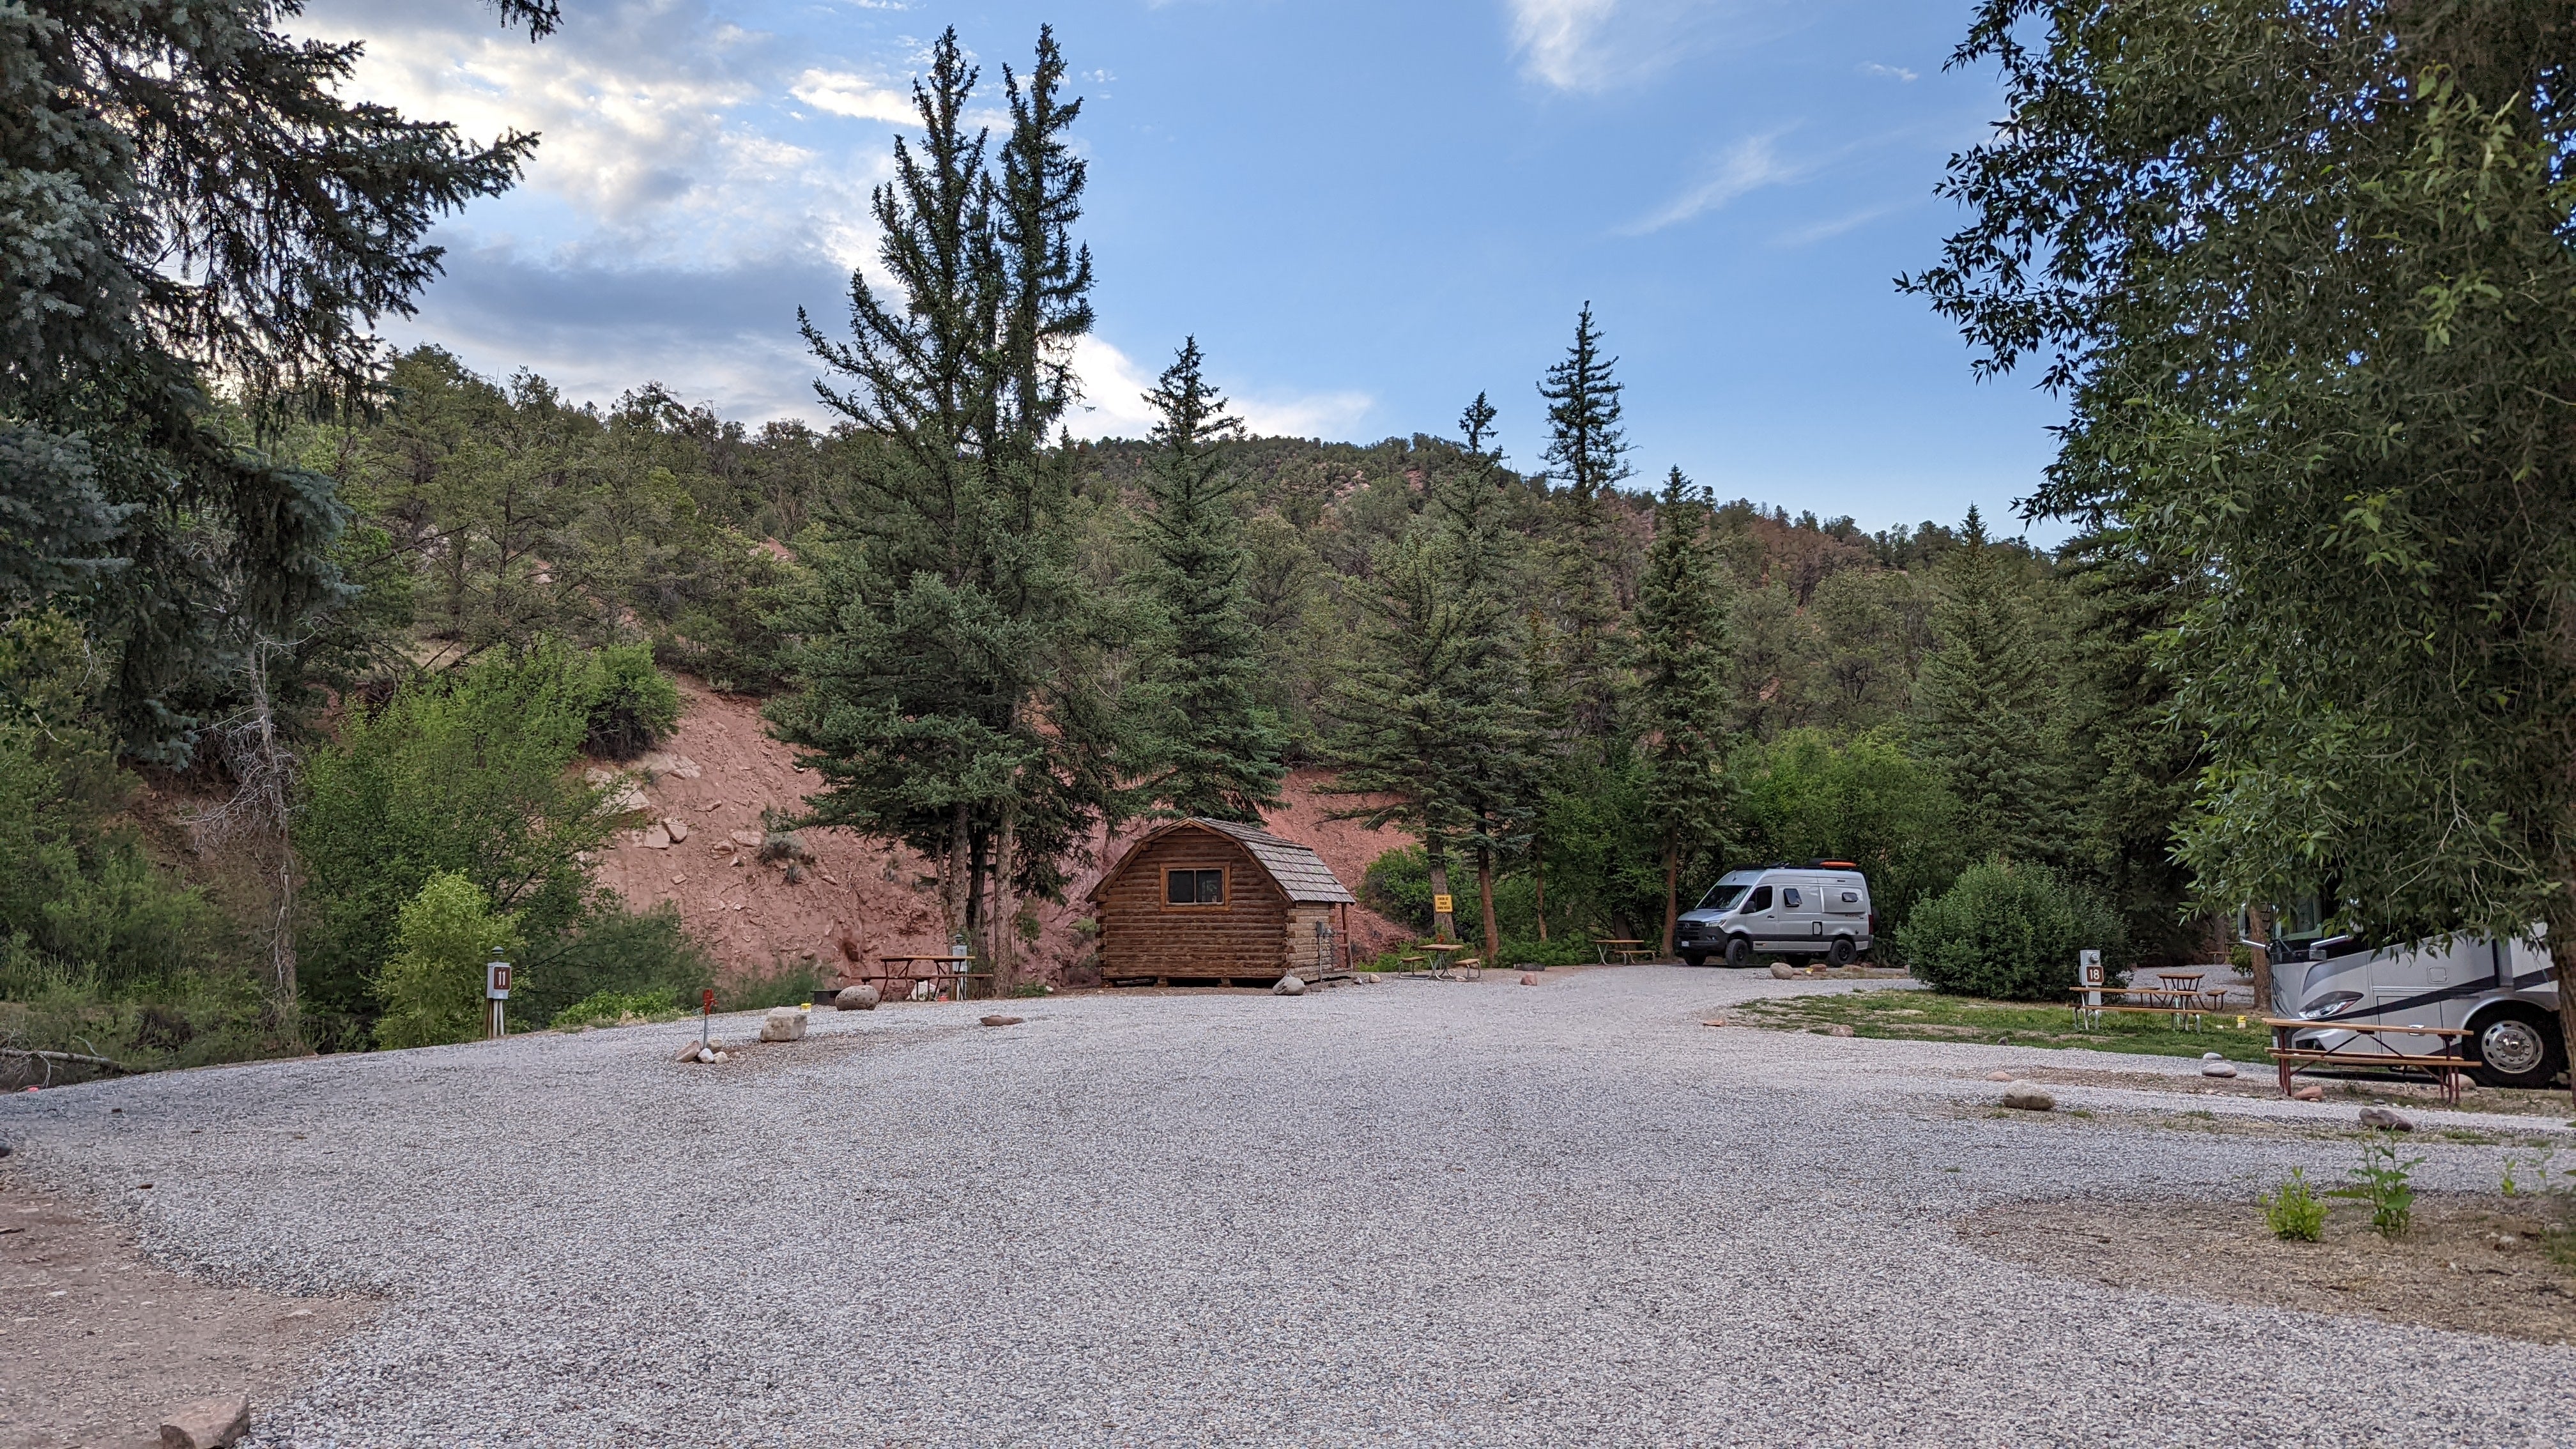 Camper submitted image from Elk Creek Campground - 4